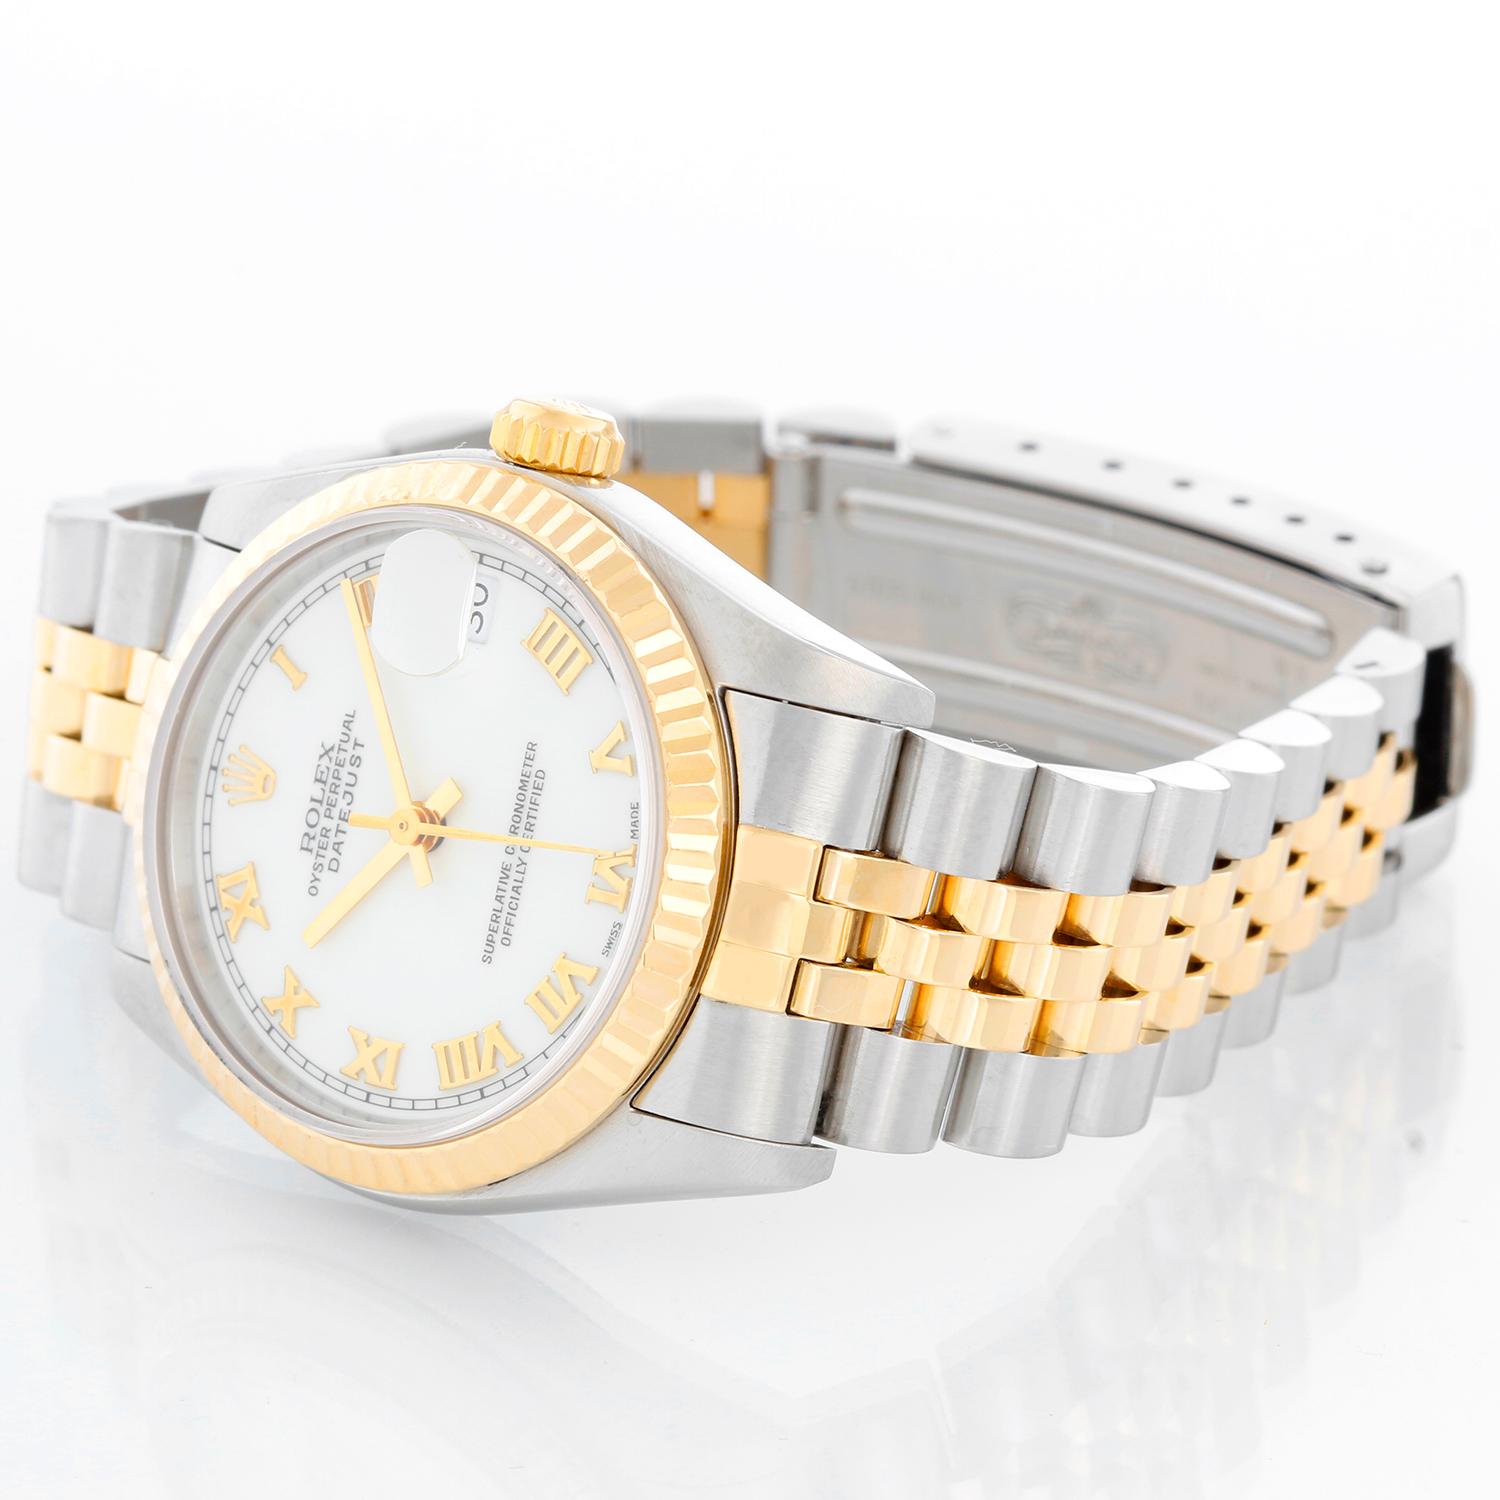 Rolex Datejust Midsize 2-Tone Watch 68273 - Automatic winding, 29 jewels, Quickset, sapphire crystal.  Stainless steel case with 18k yellow gold  fluted bezel. White dial with black Roman numerals and gold hour markers. Stainless steel and 18k